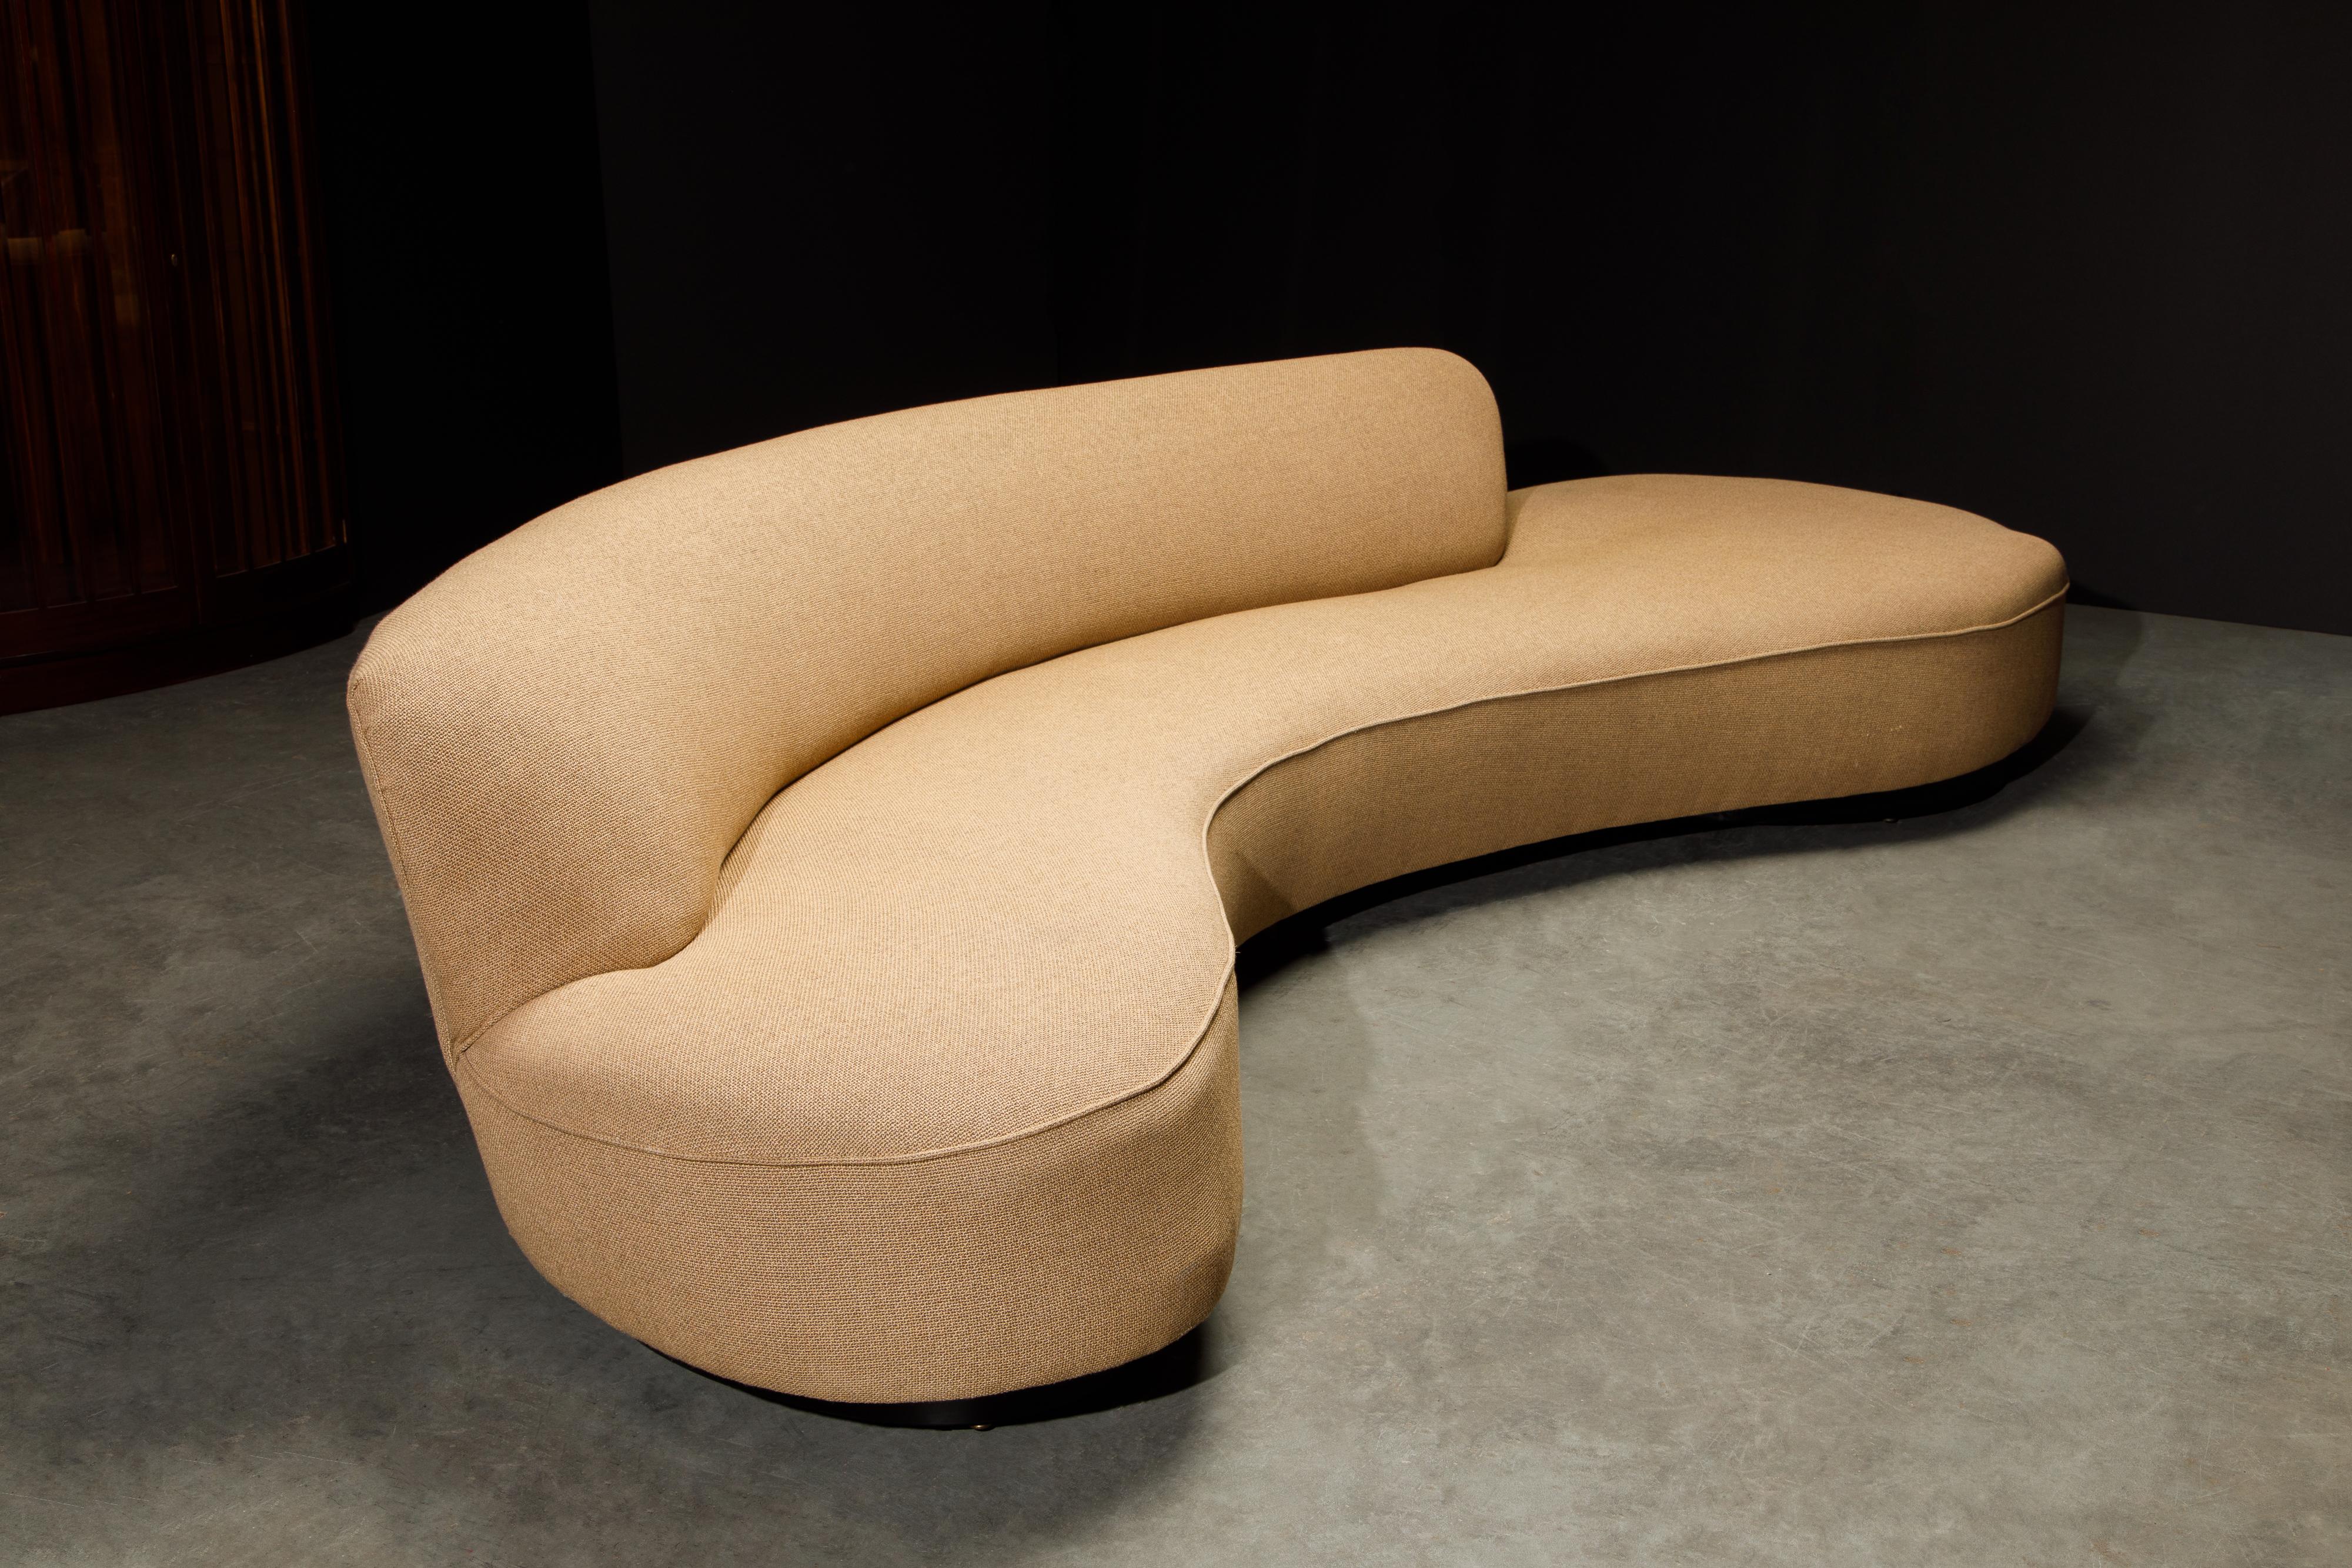 Early 'Serpentine' Sofa by Vladimir Kagan, circa 1960, Signed and Registered  1